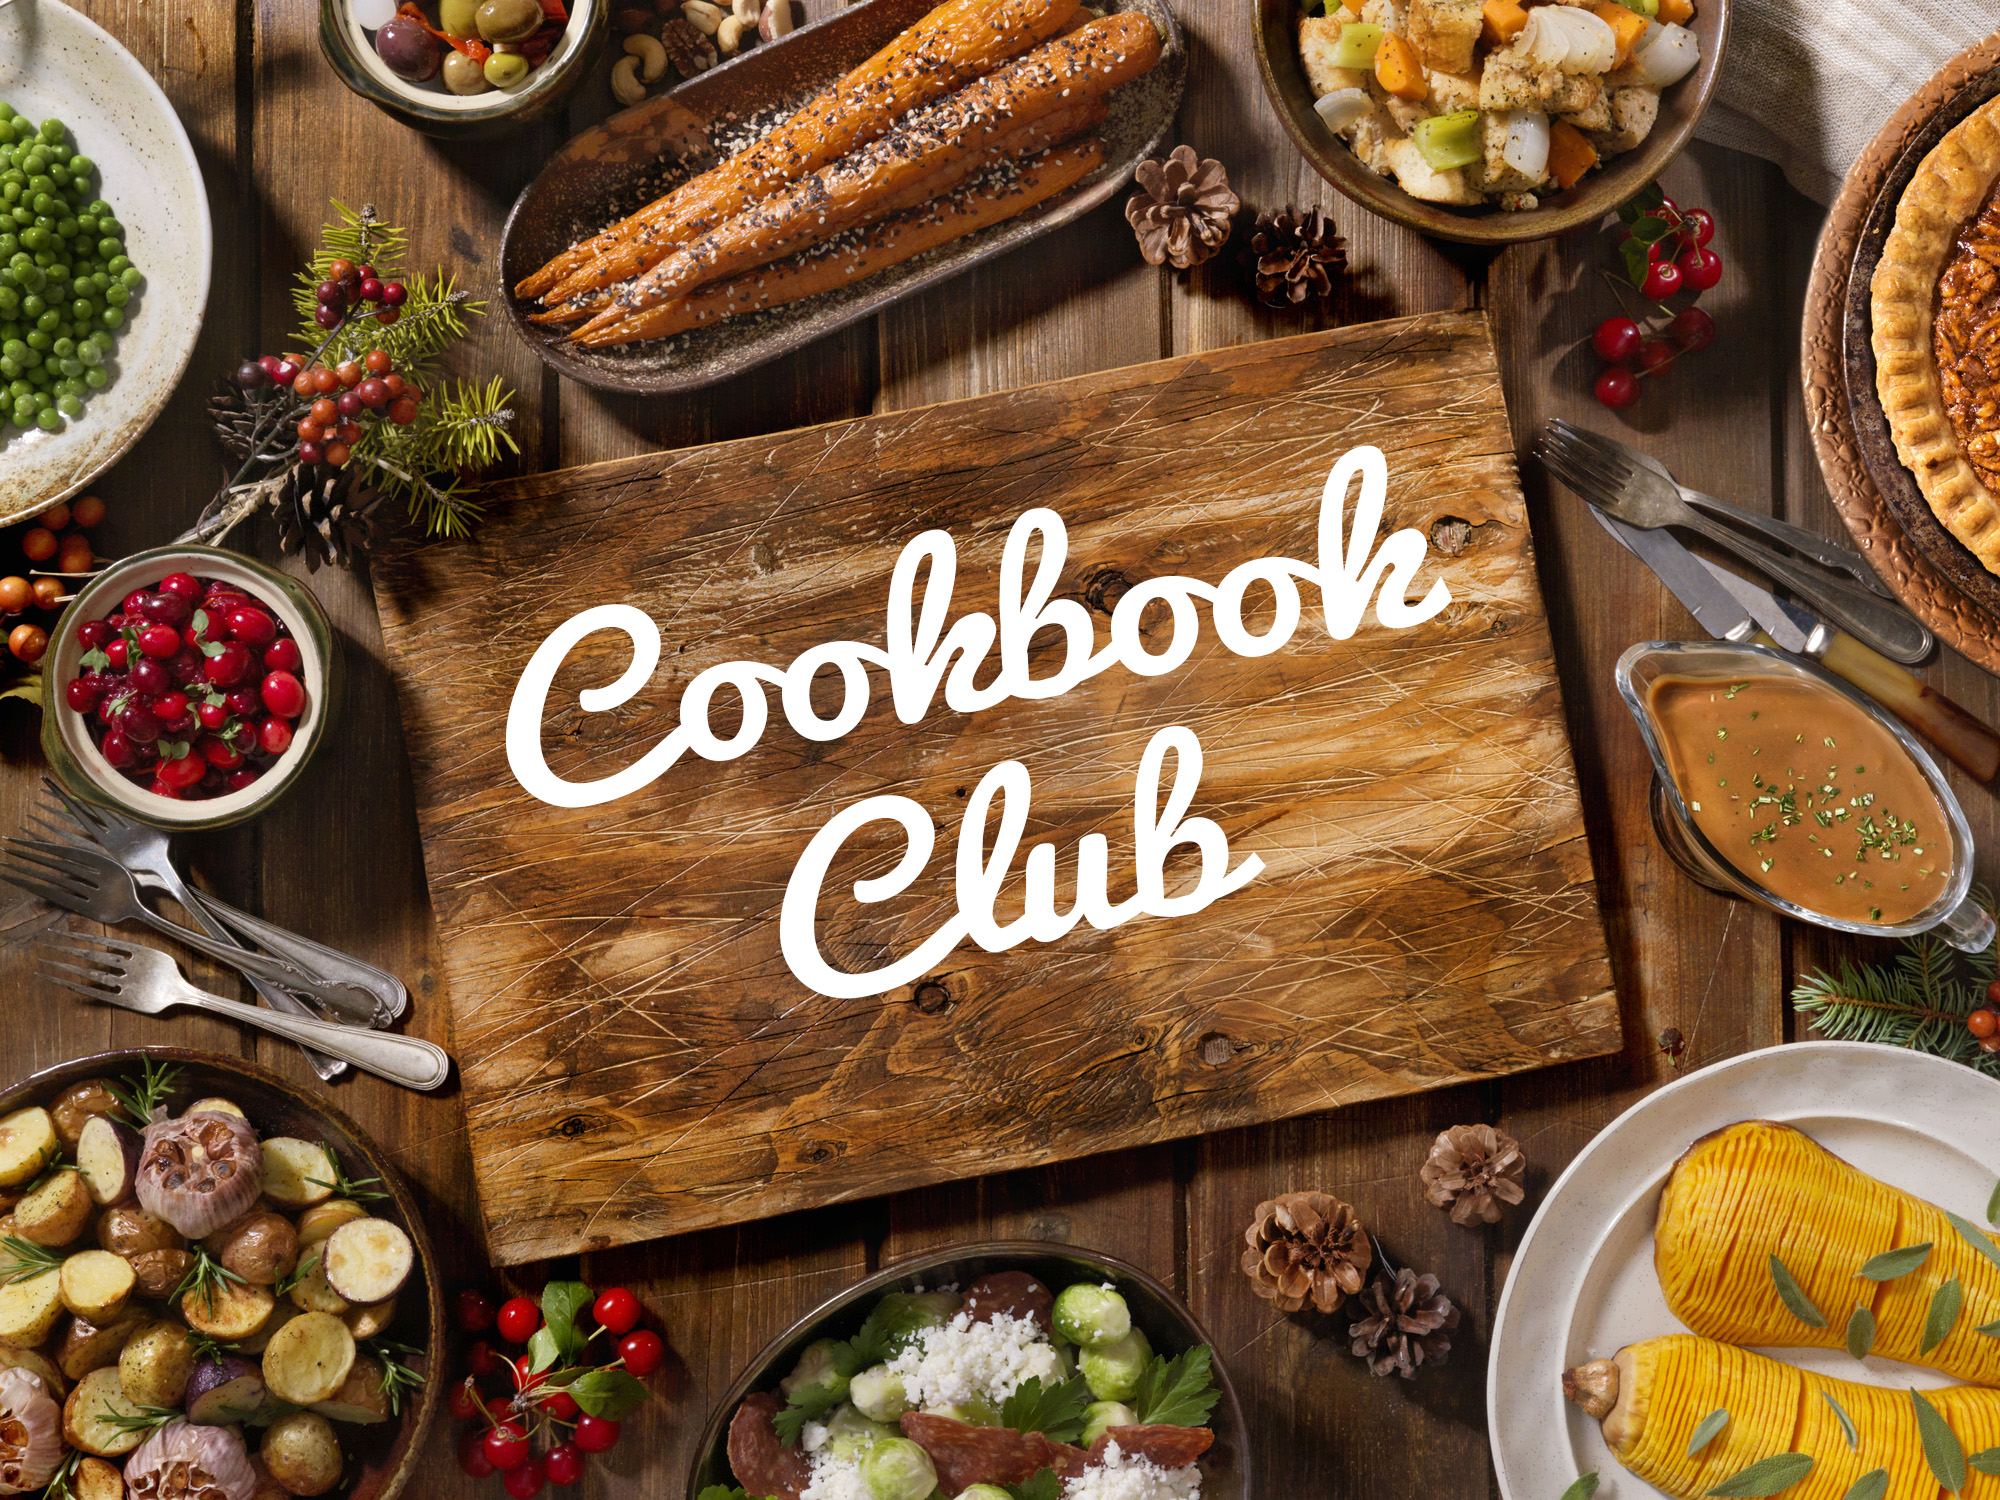 Cookbook Club sign and food